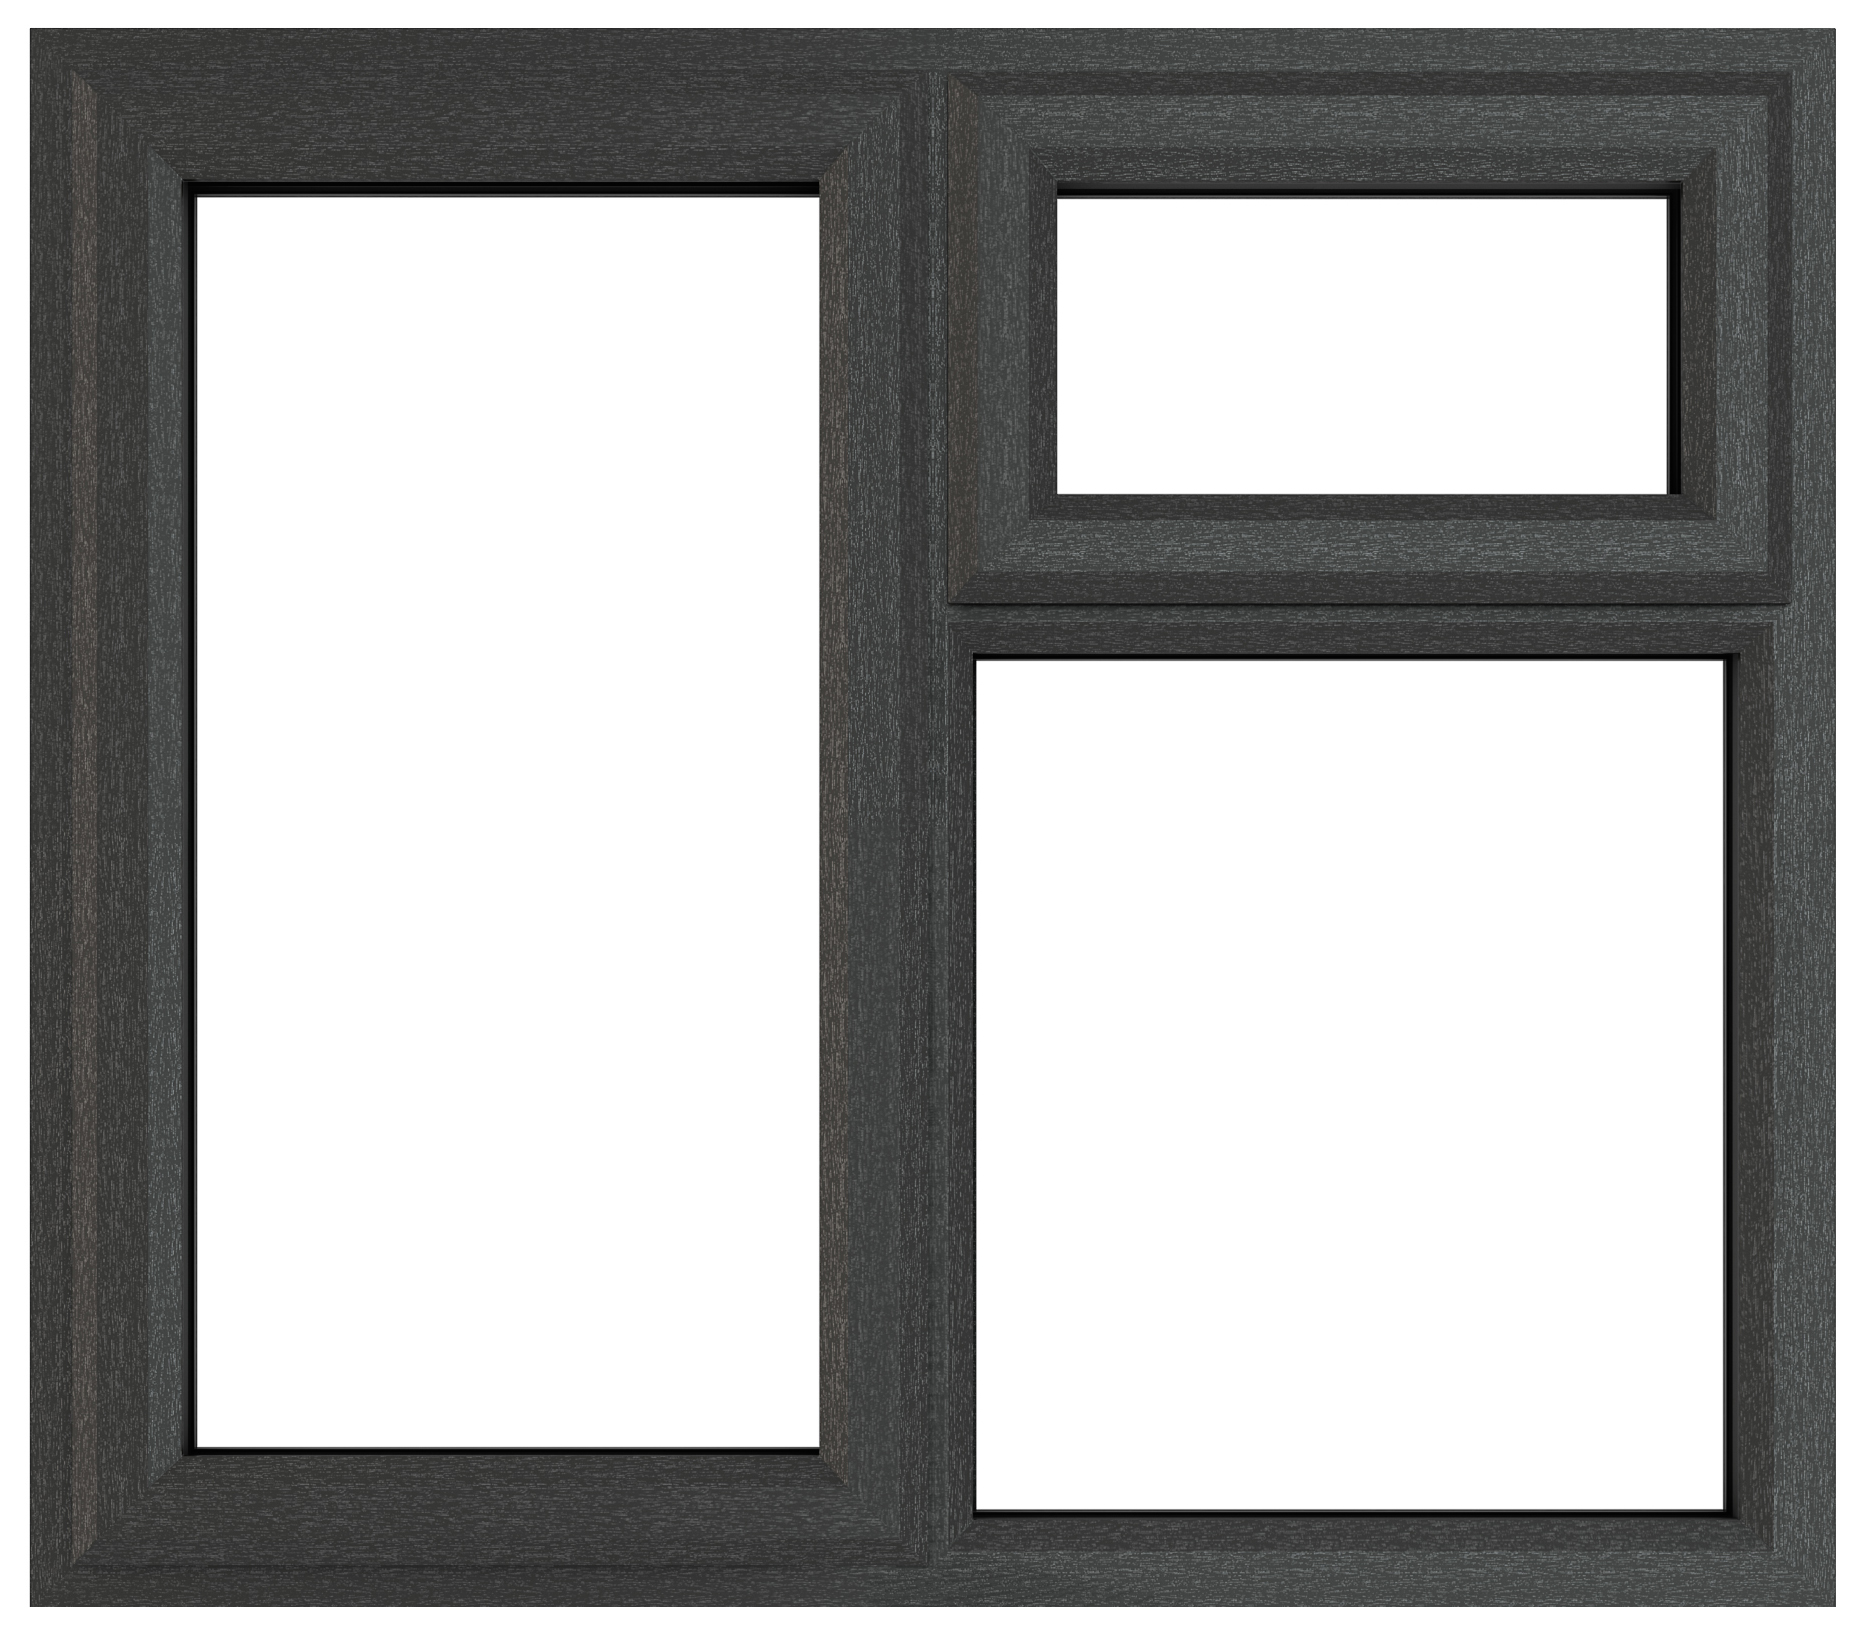 Crystal uPVC Grey Left Hung Top Opener Clear Double Glazed Fixed Light Window - 1190 x 1040mm